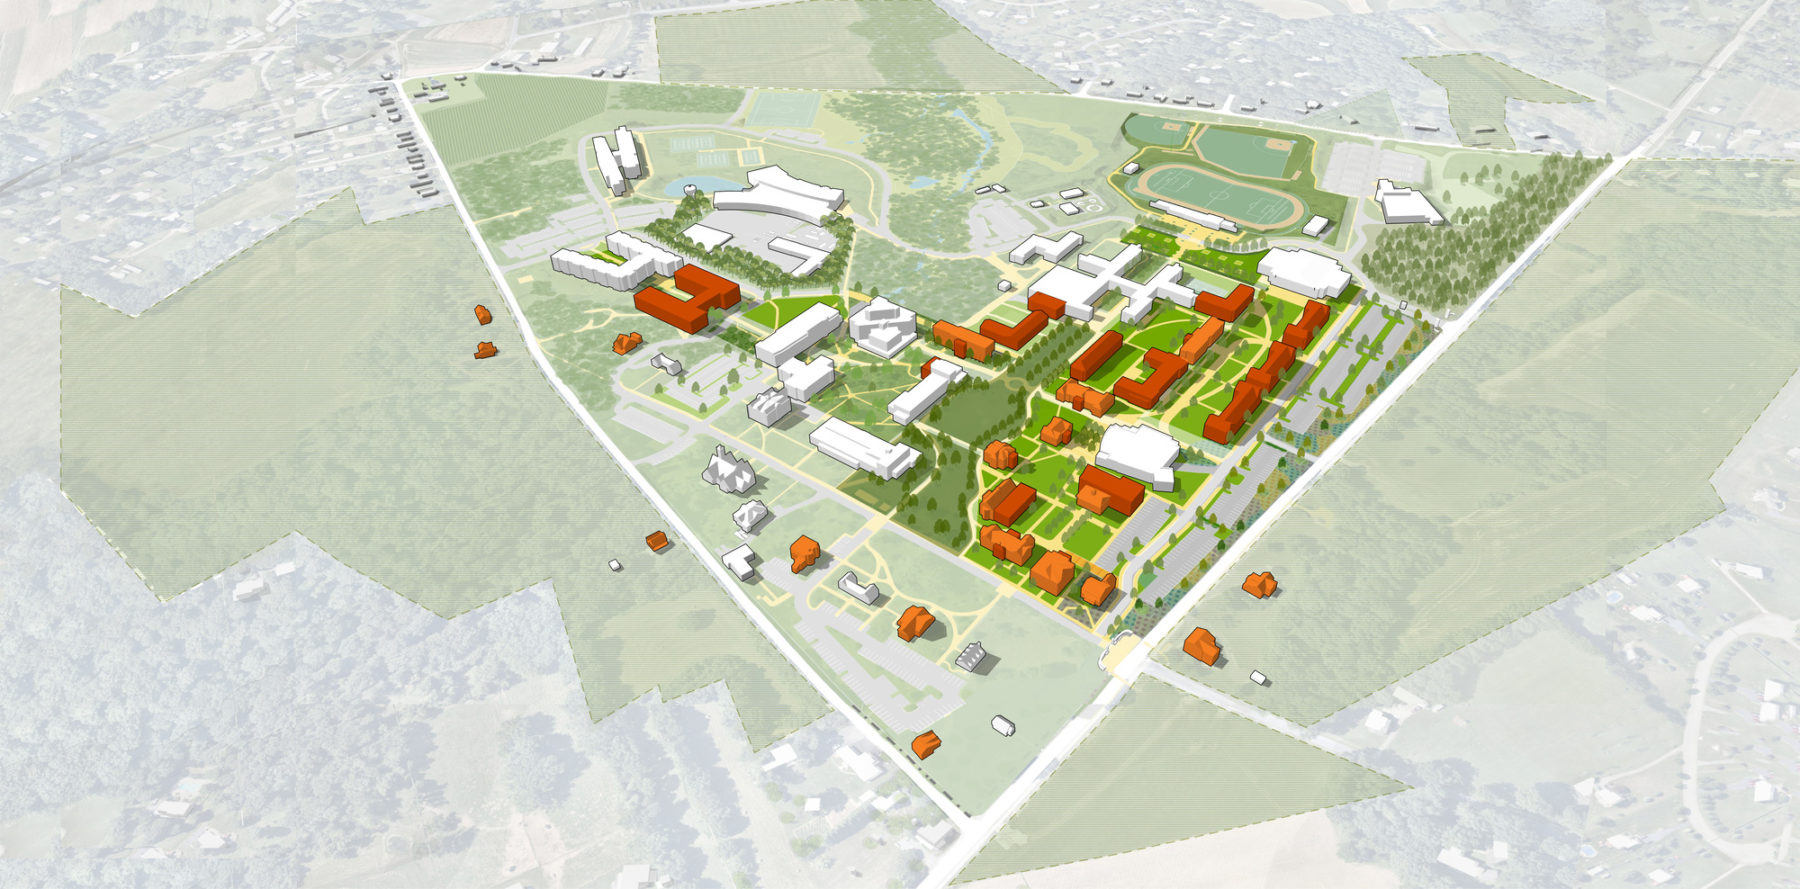 aerial perspective drawing showing overall campus framework